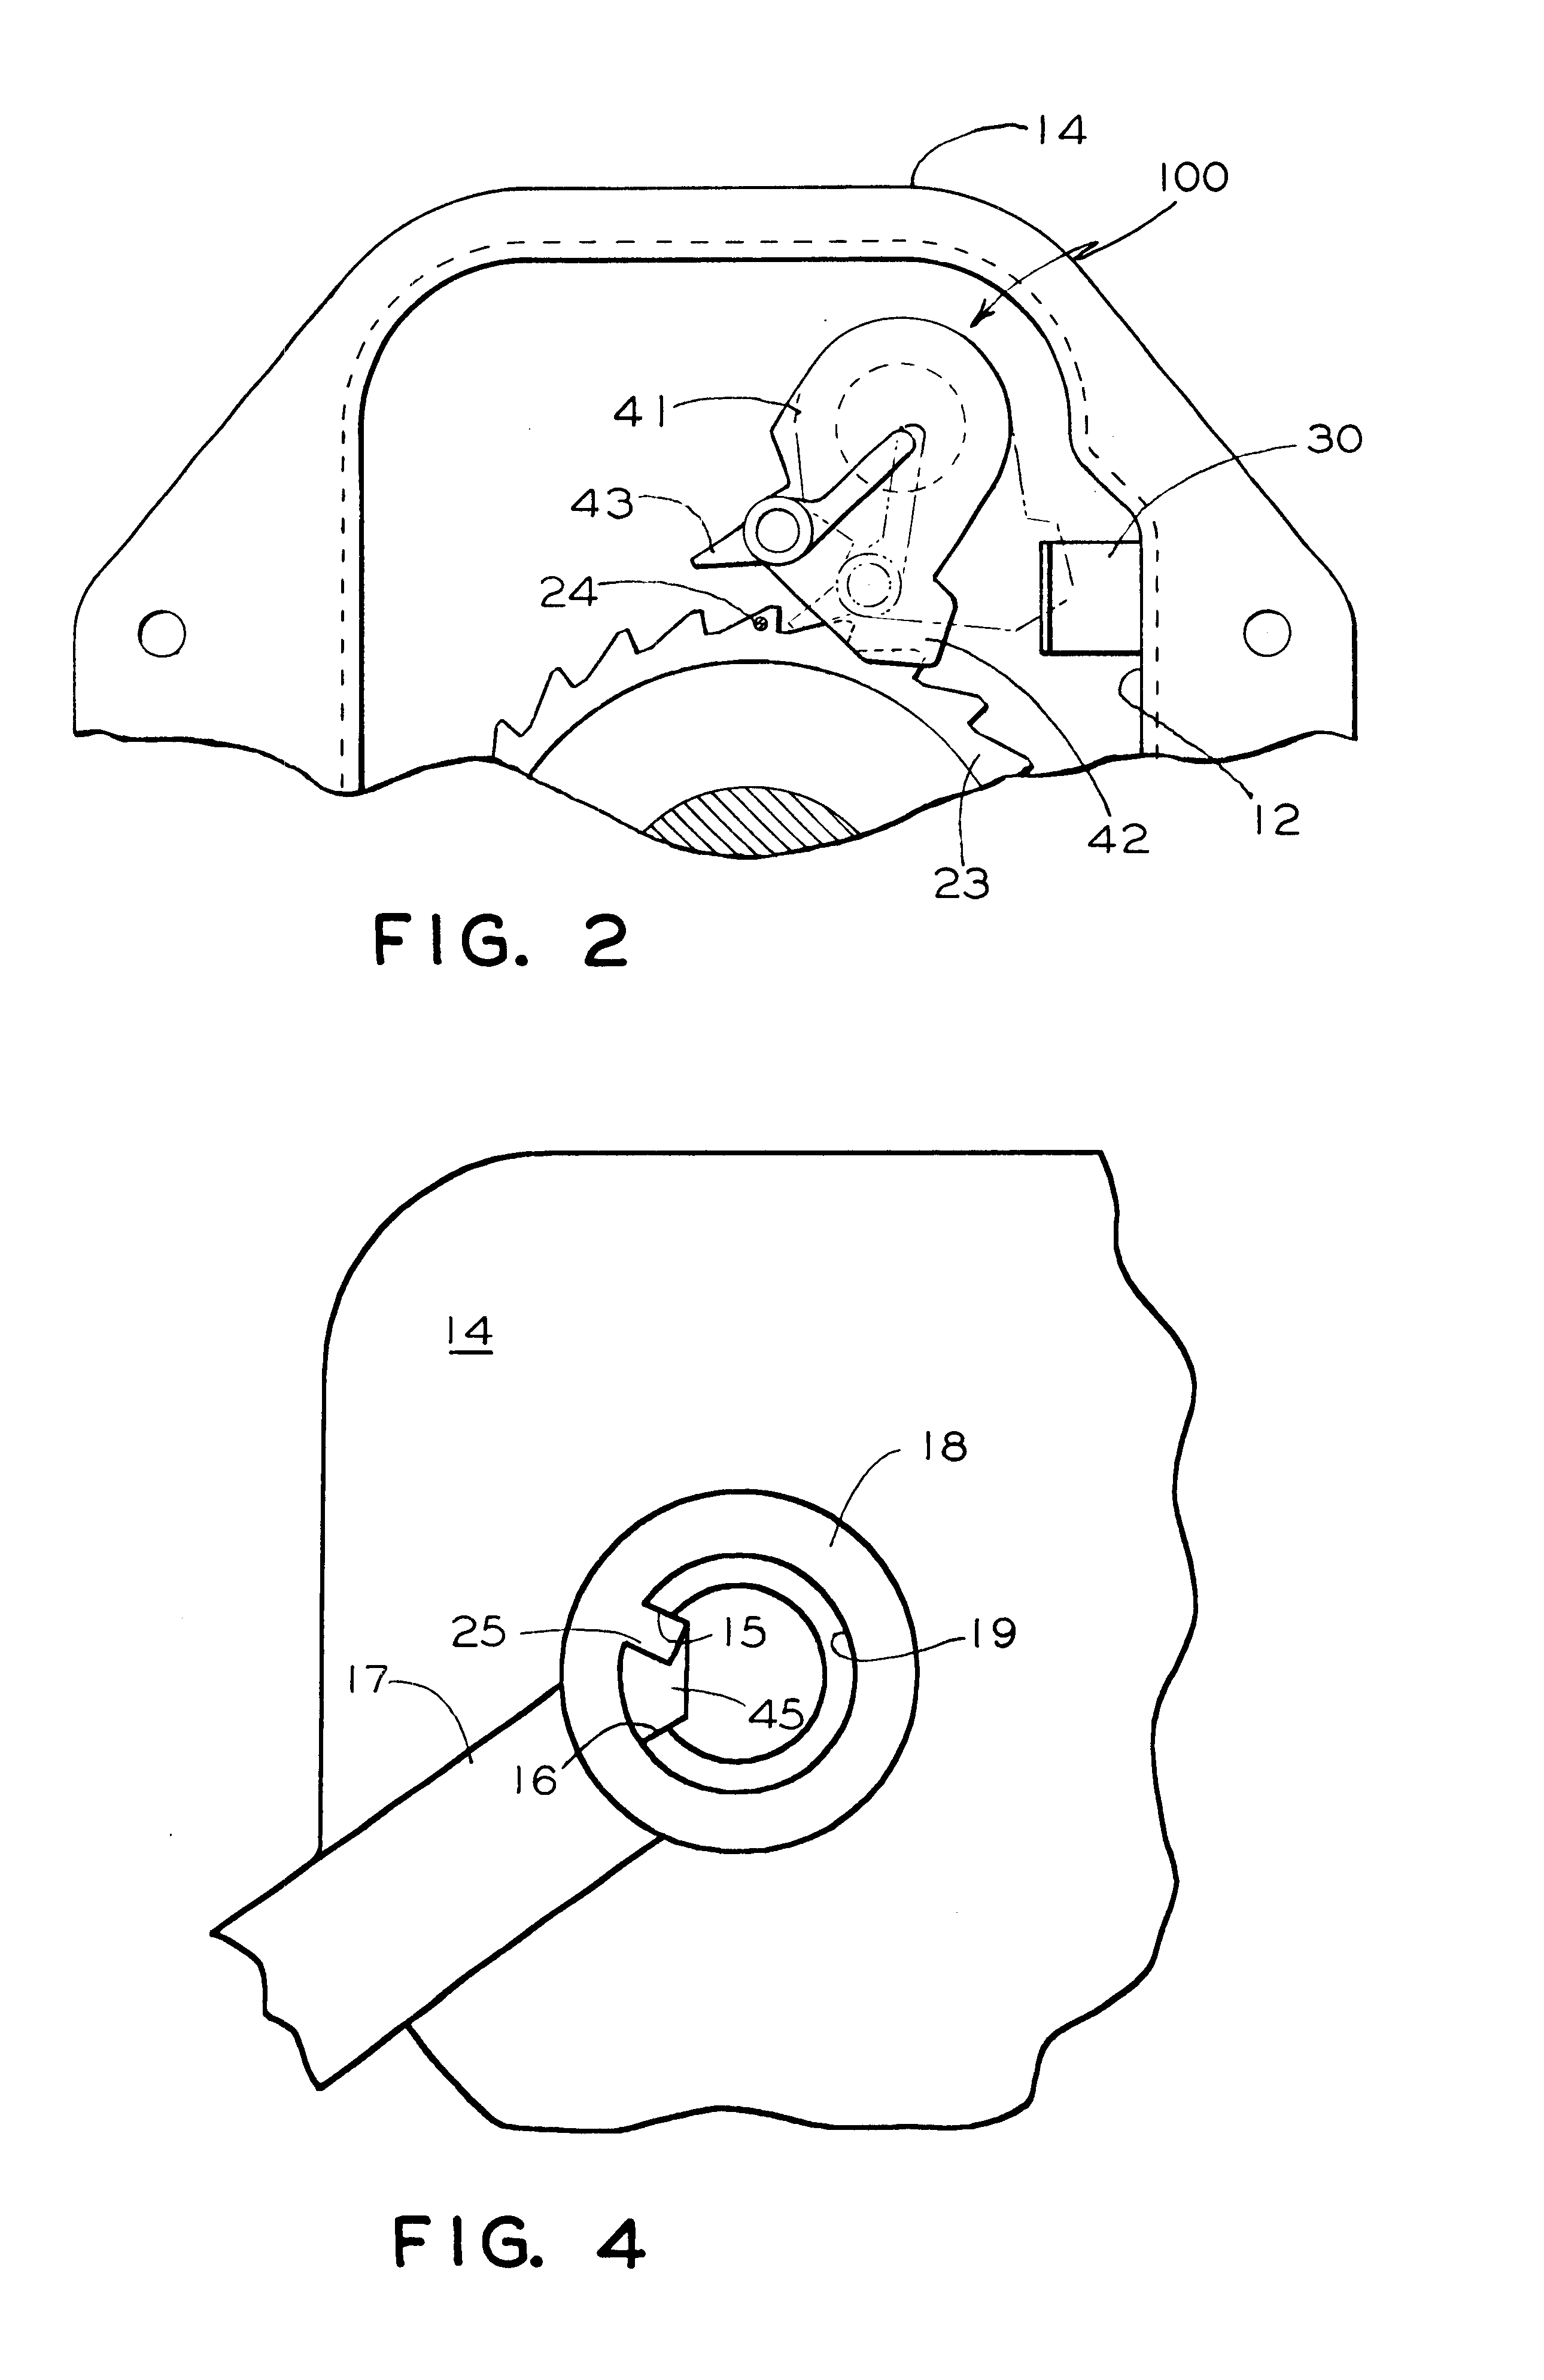 Apparatus for a quick release mechanism in a railcar hand brake